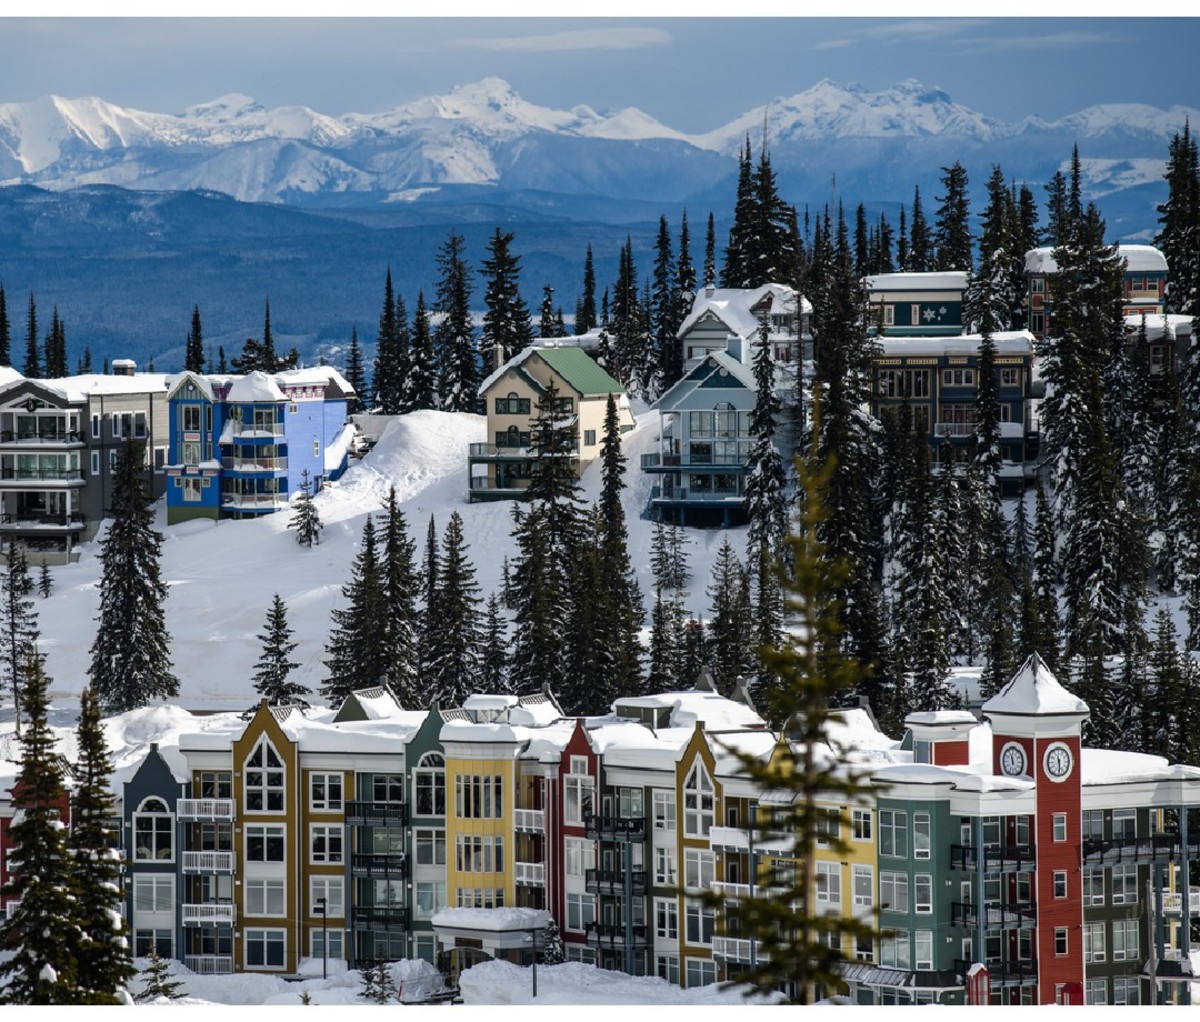 Chalets at SilverStar Mountain Resort with the Monashee Mountains in the distance.